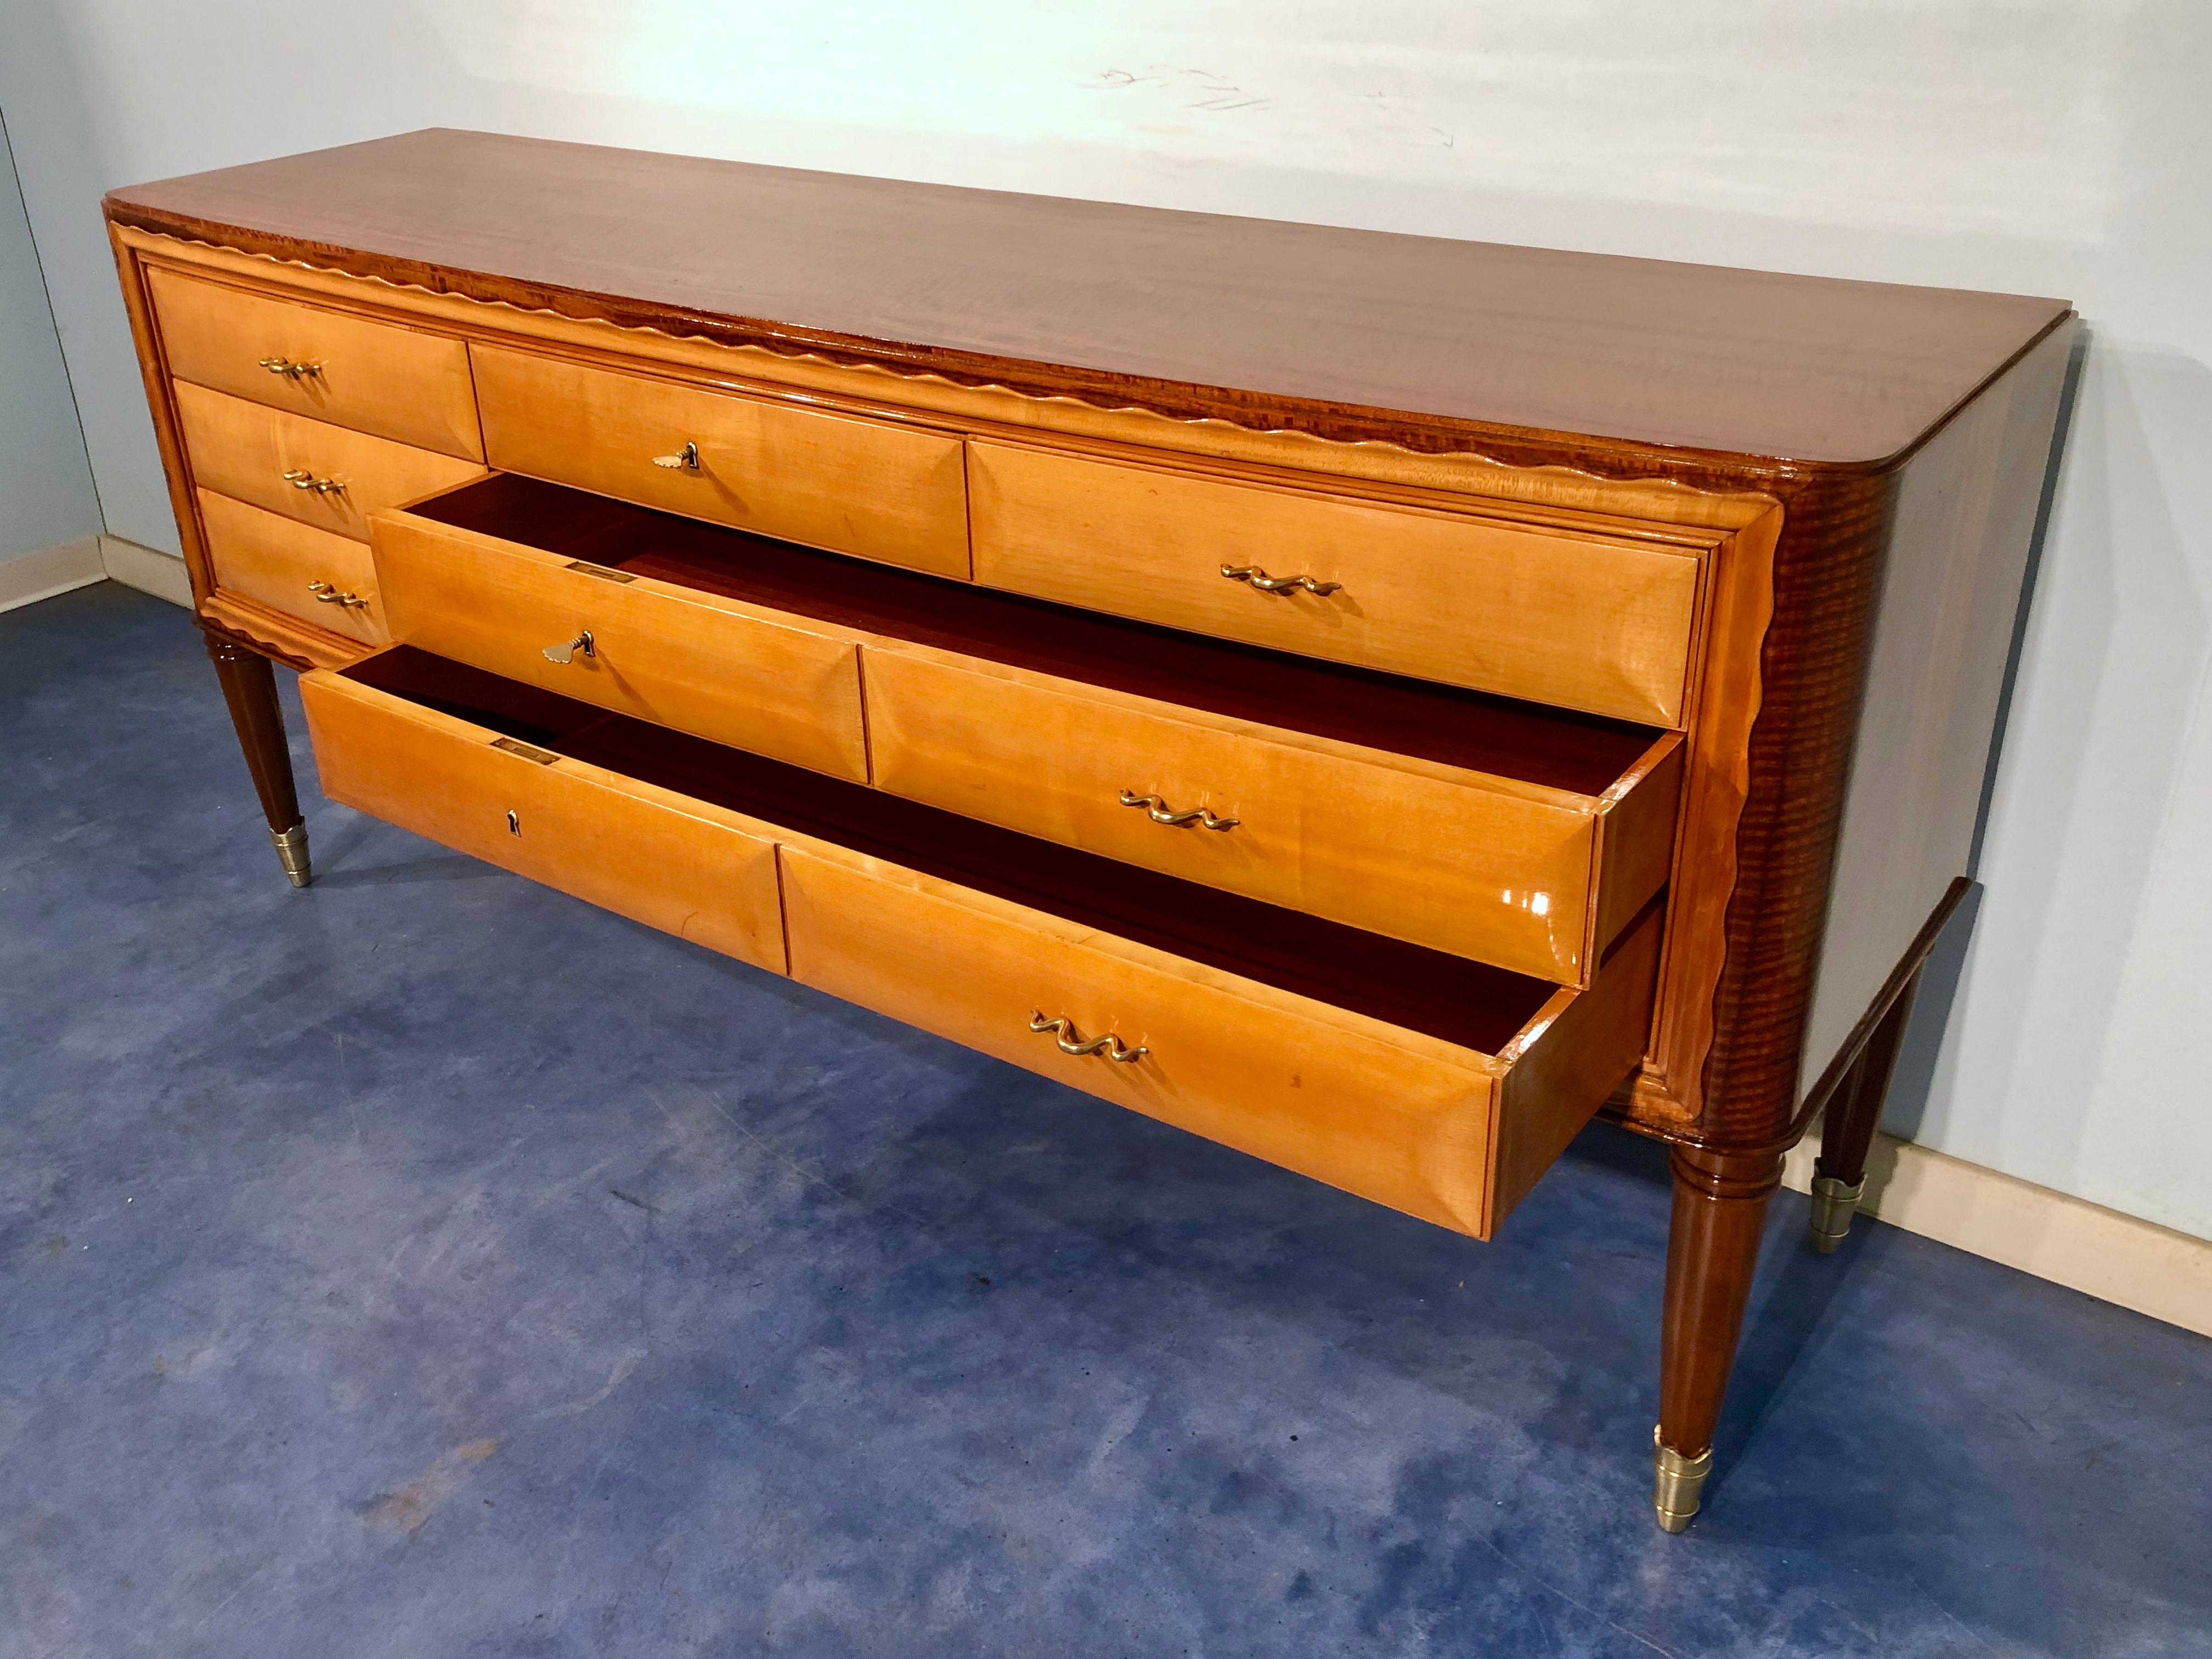 Italian Midcentury Sideboard or Chest of Drawers by Paolo Buffa, 1950s For Sale 6